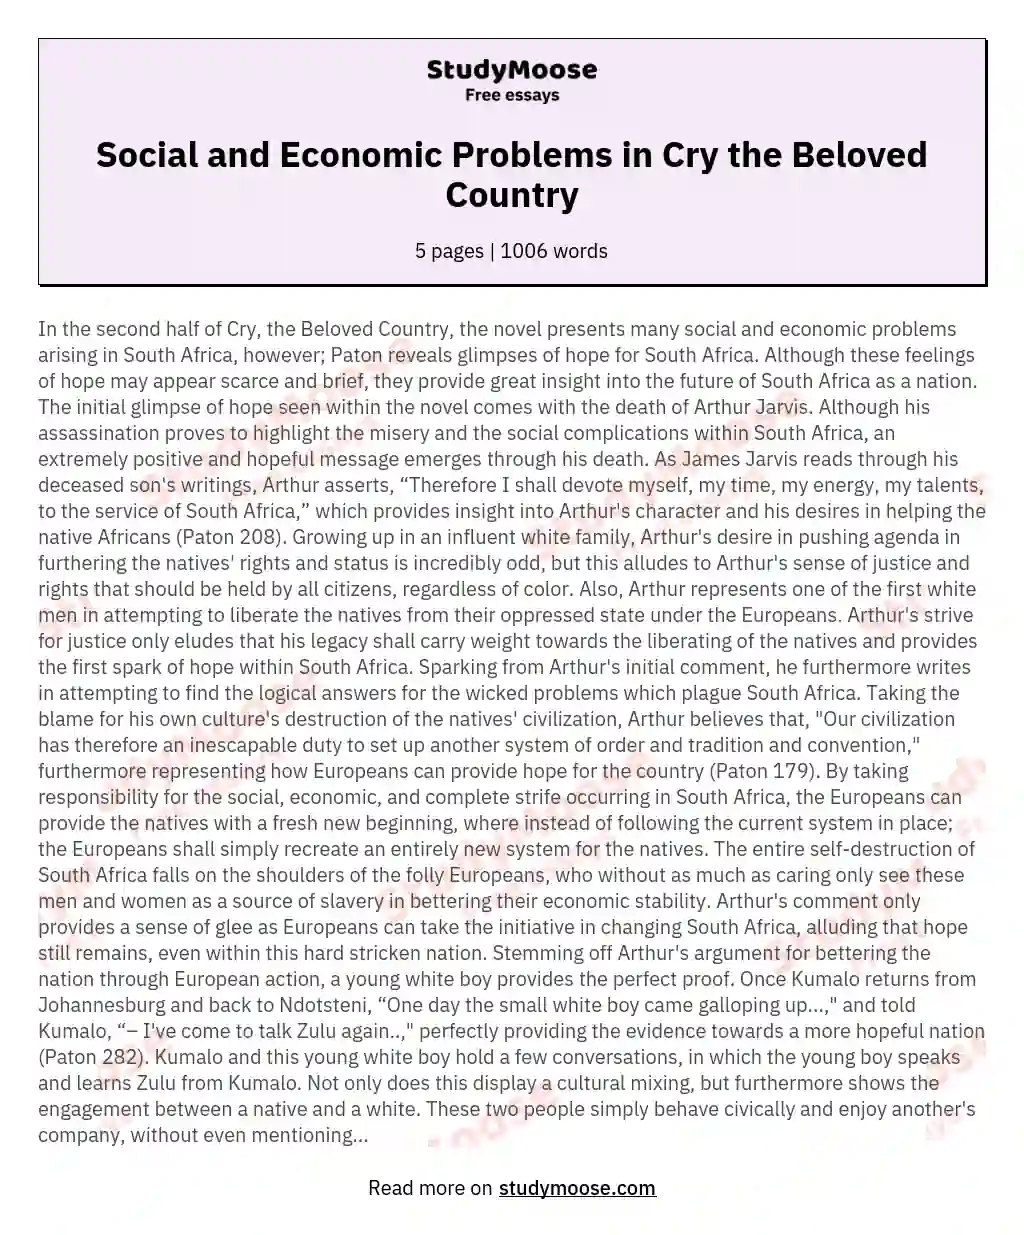 Social and Economic Problems in Cry the Beloved Country